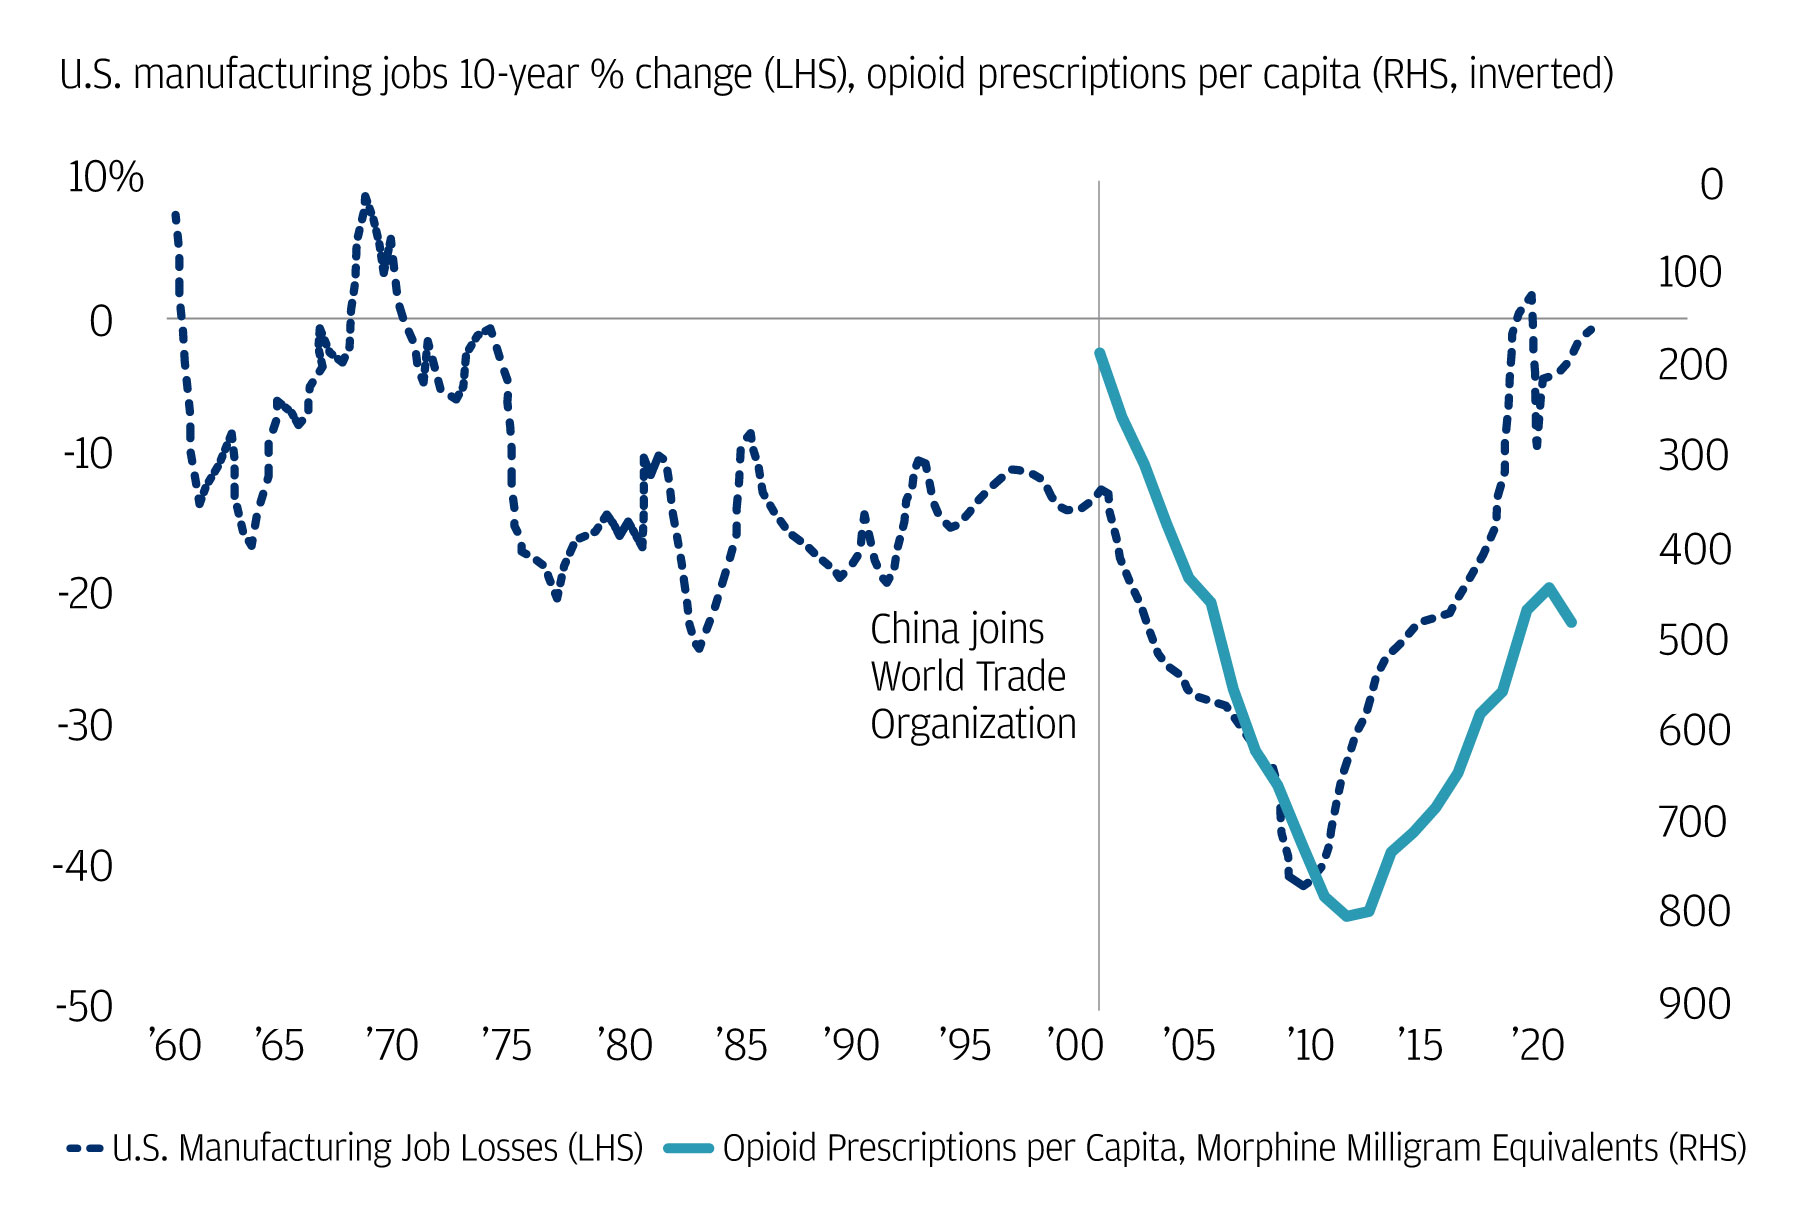 Manufacturing job loss coincided with rising opioid use